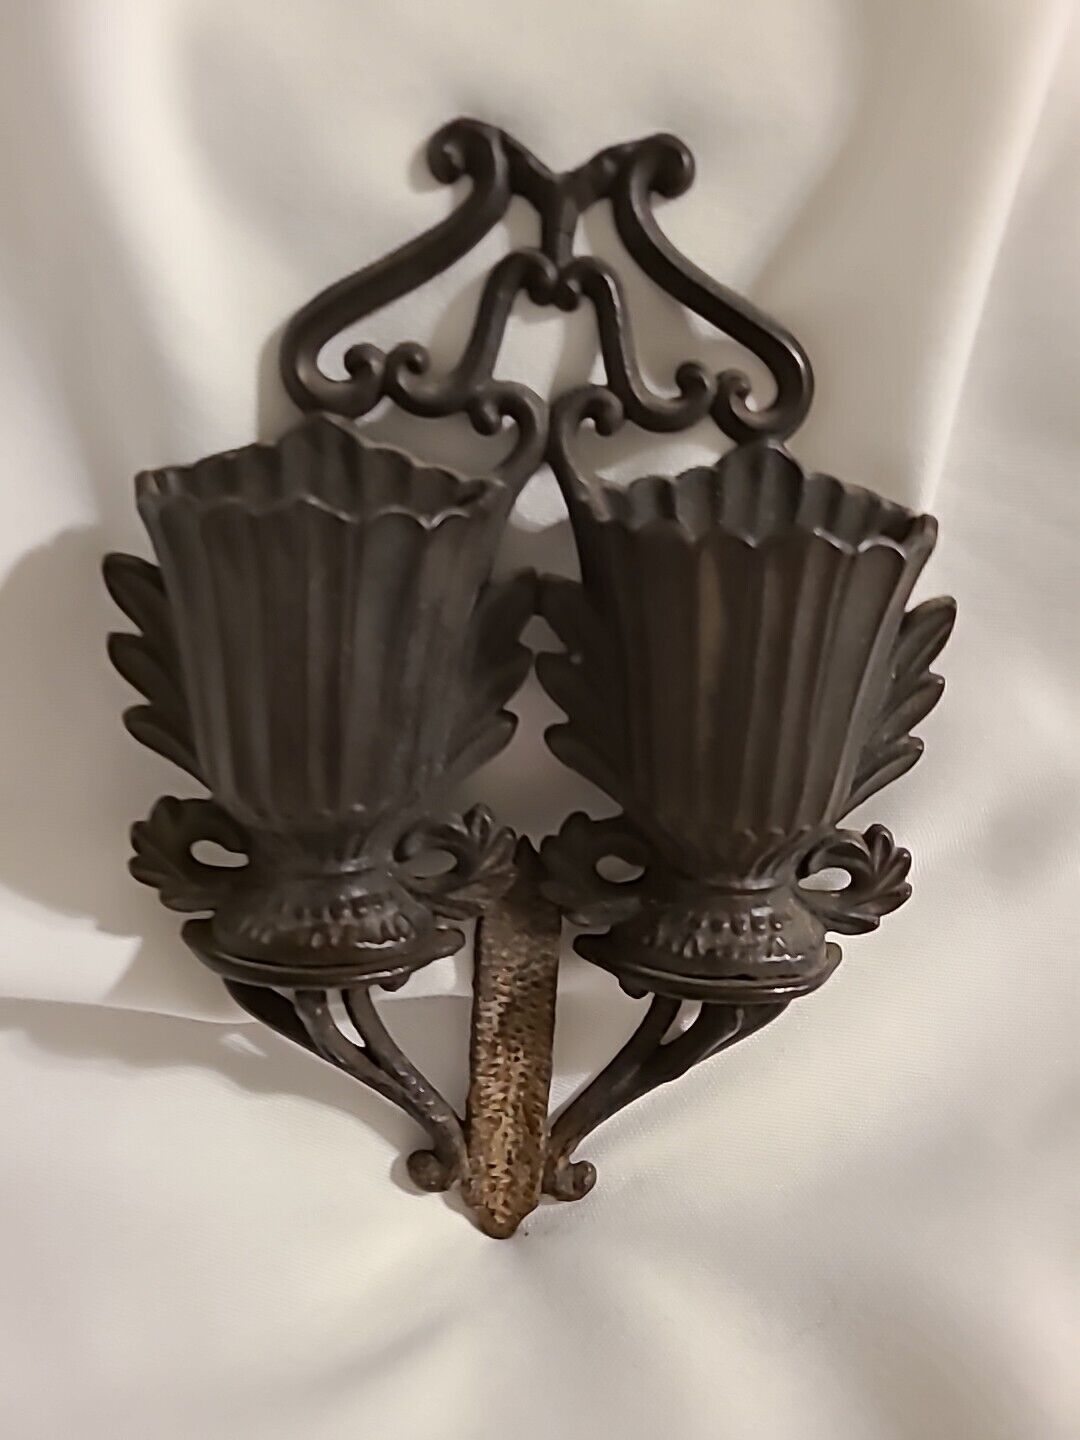 Antique Cast Iron Double Urn Match Holder With Striker - Patd Jan 15, 1867 Old